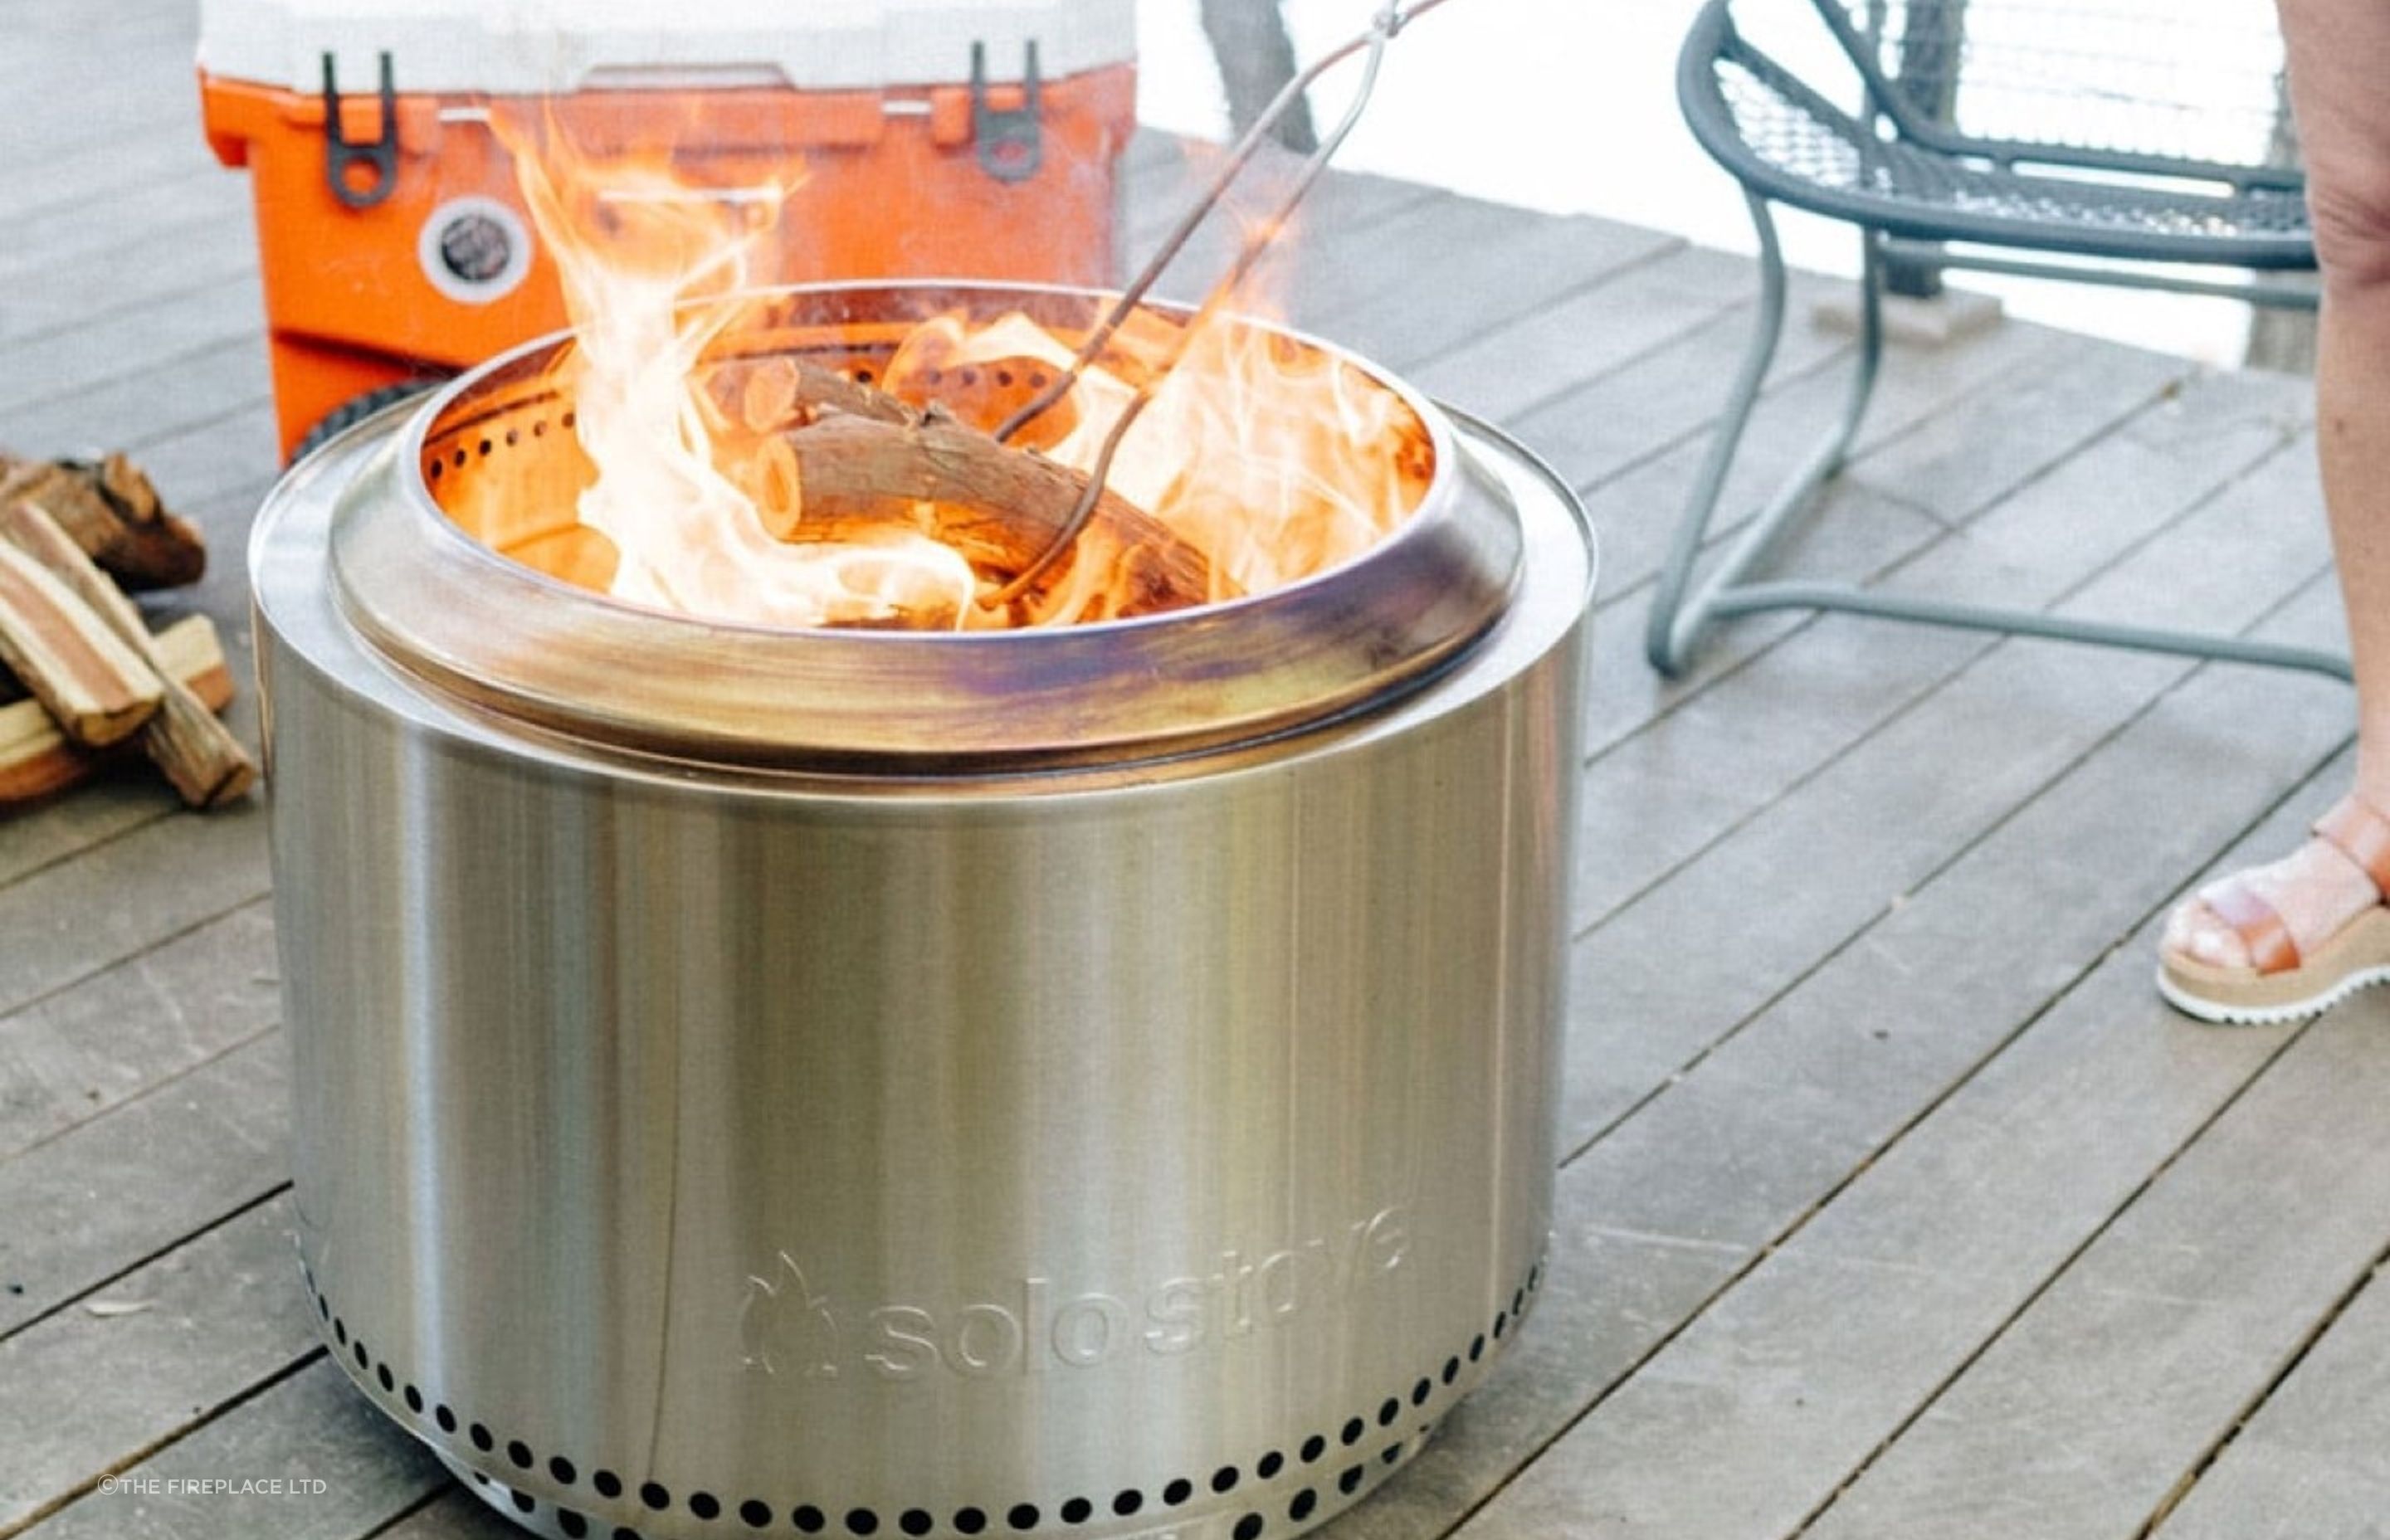 A portable fire pit, like the Solo Stove, can be easily moved and used in different ways offering tremendous versatility.